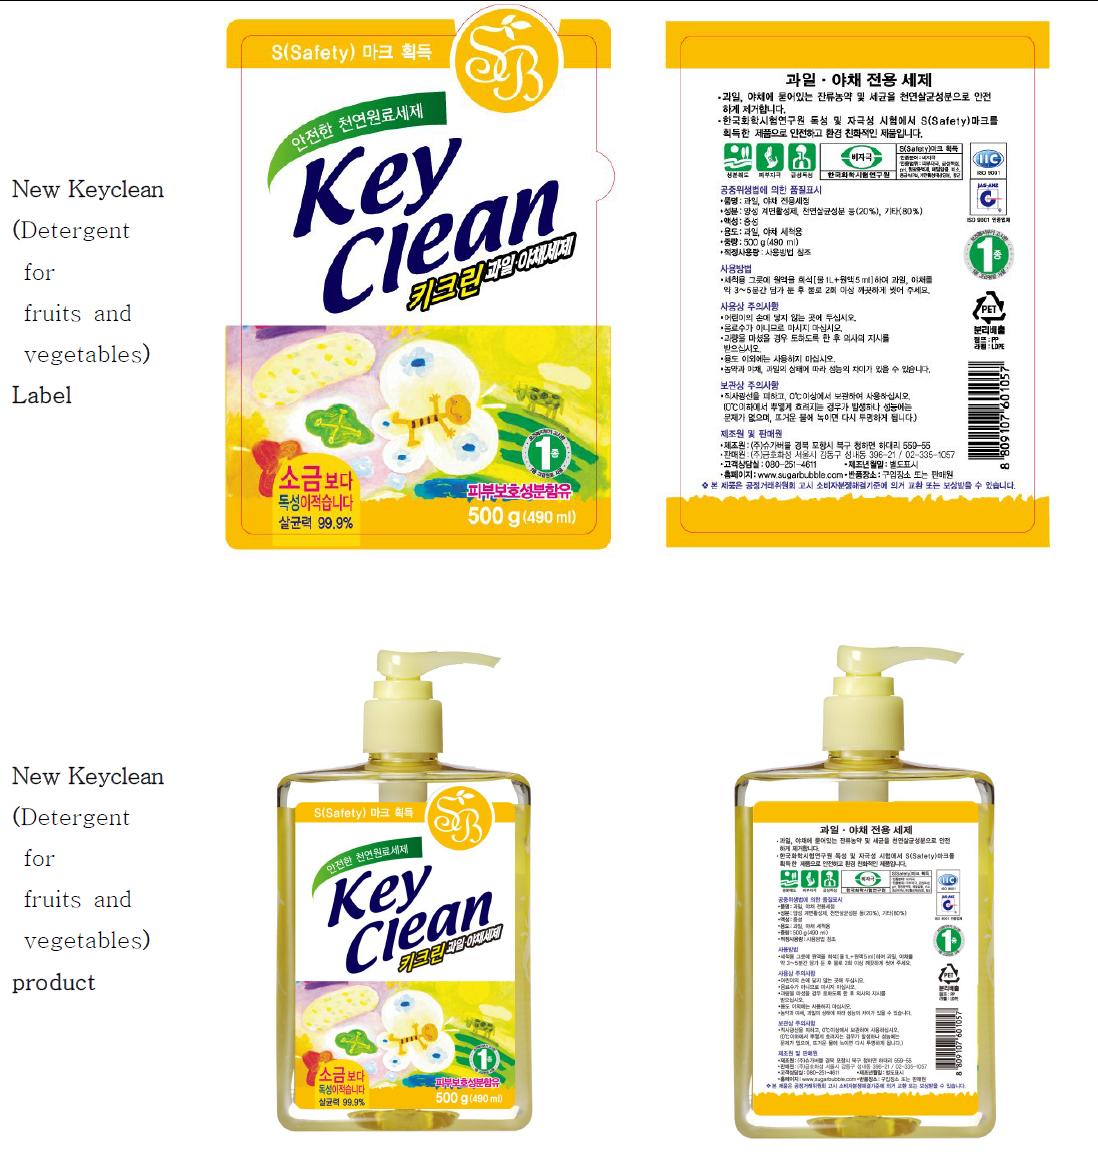 Detergent of New Keyclean for fruits and vegetables